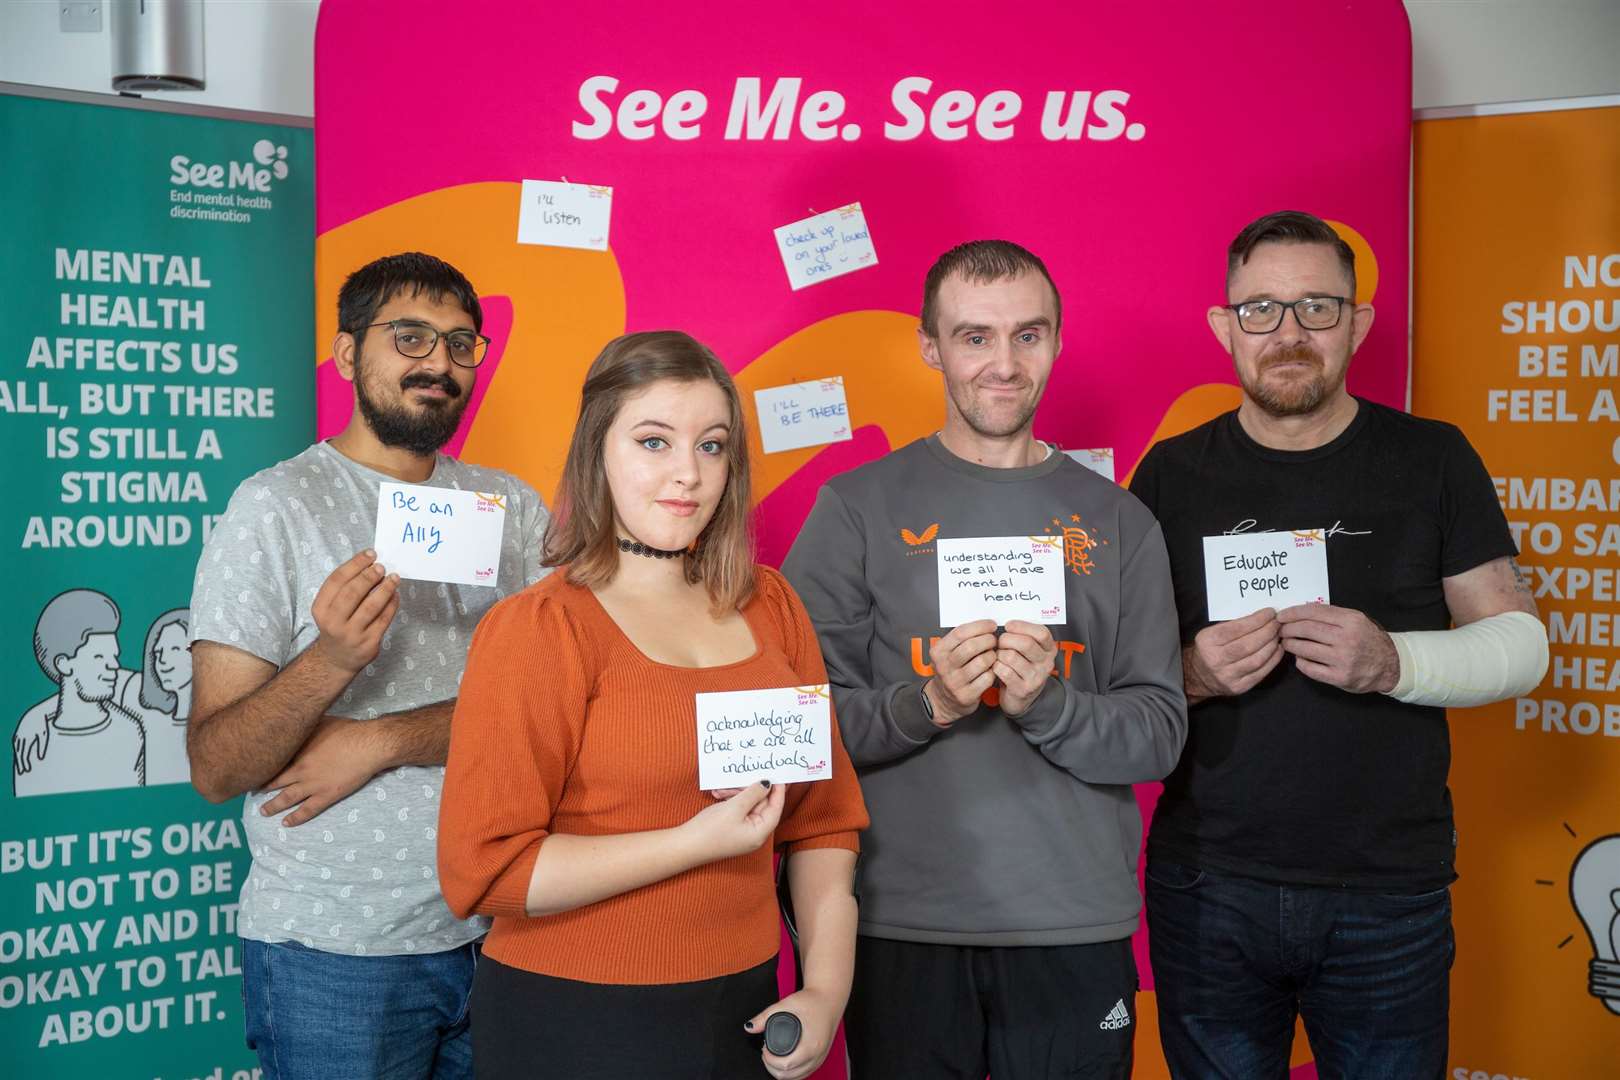 See Me has launched the See Us campaign which aims to build on improved public perceptions of mental health.